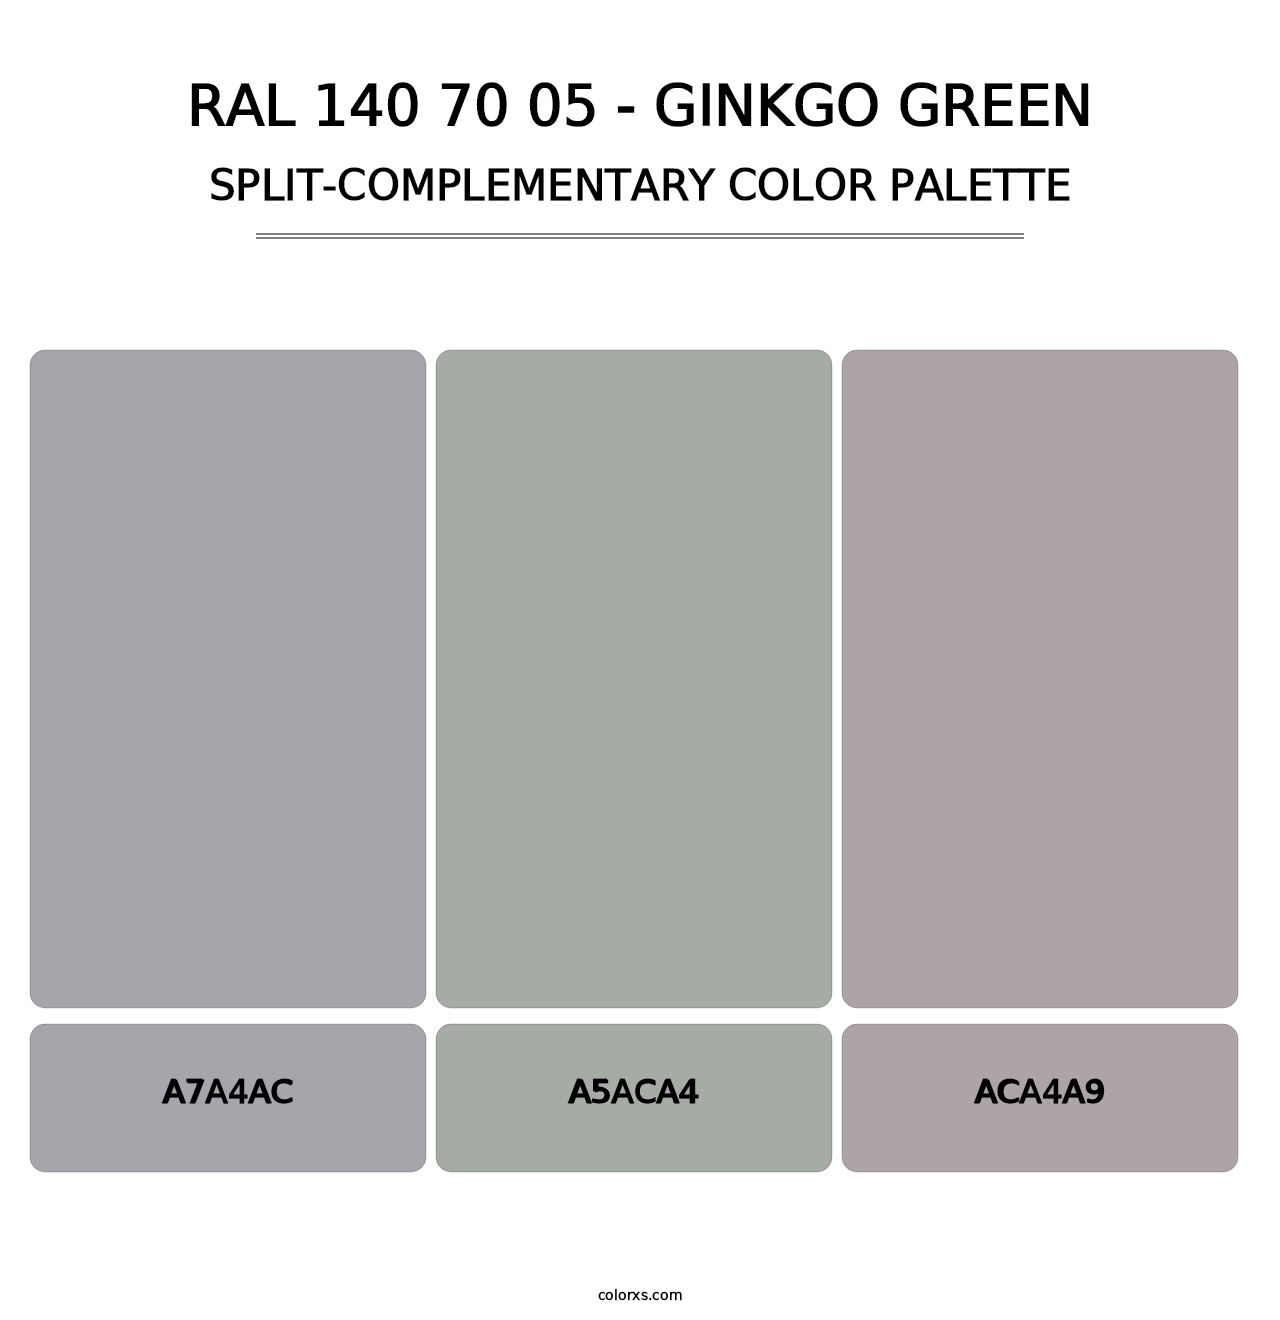 RAL 140 70 05 - Ginkgo Green - Split-Complementary Color Palette